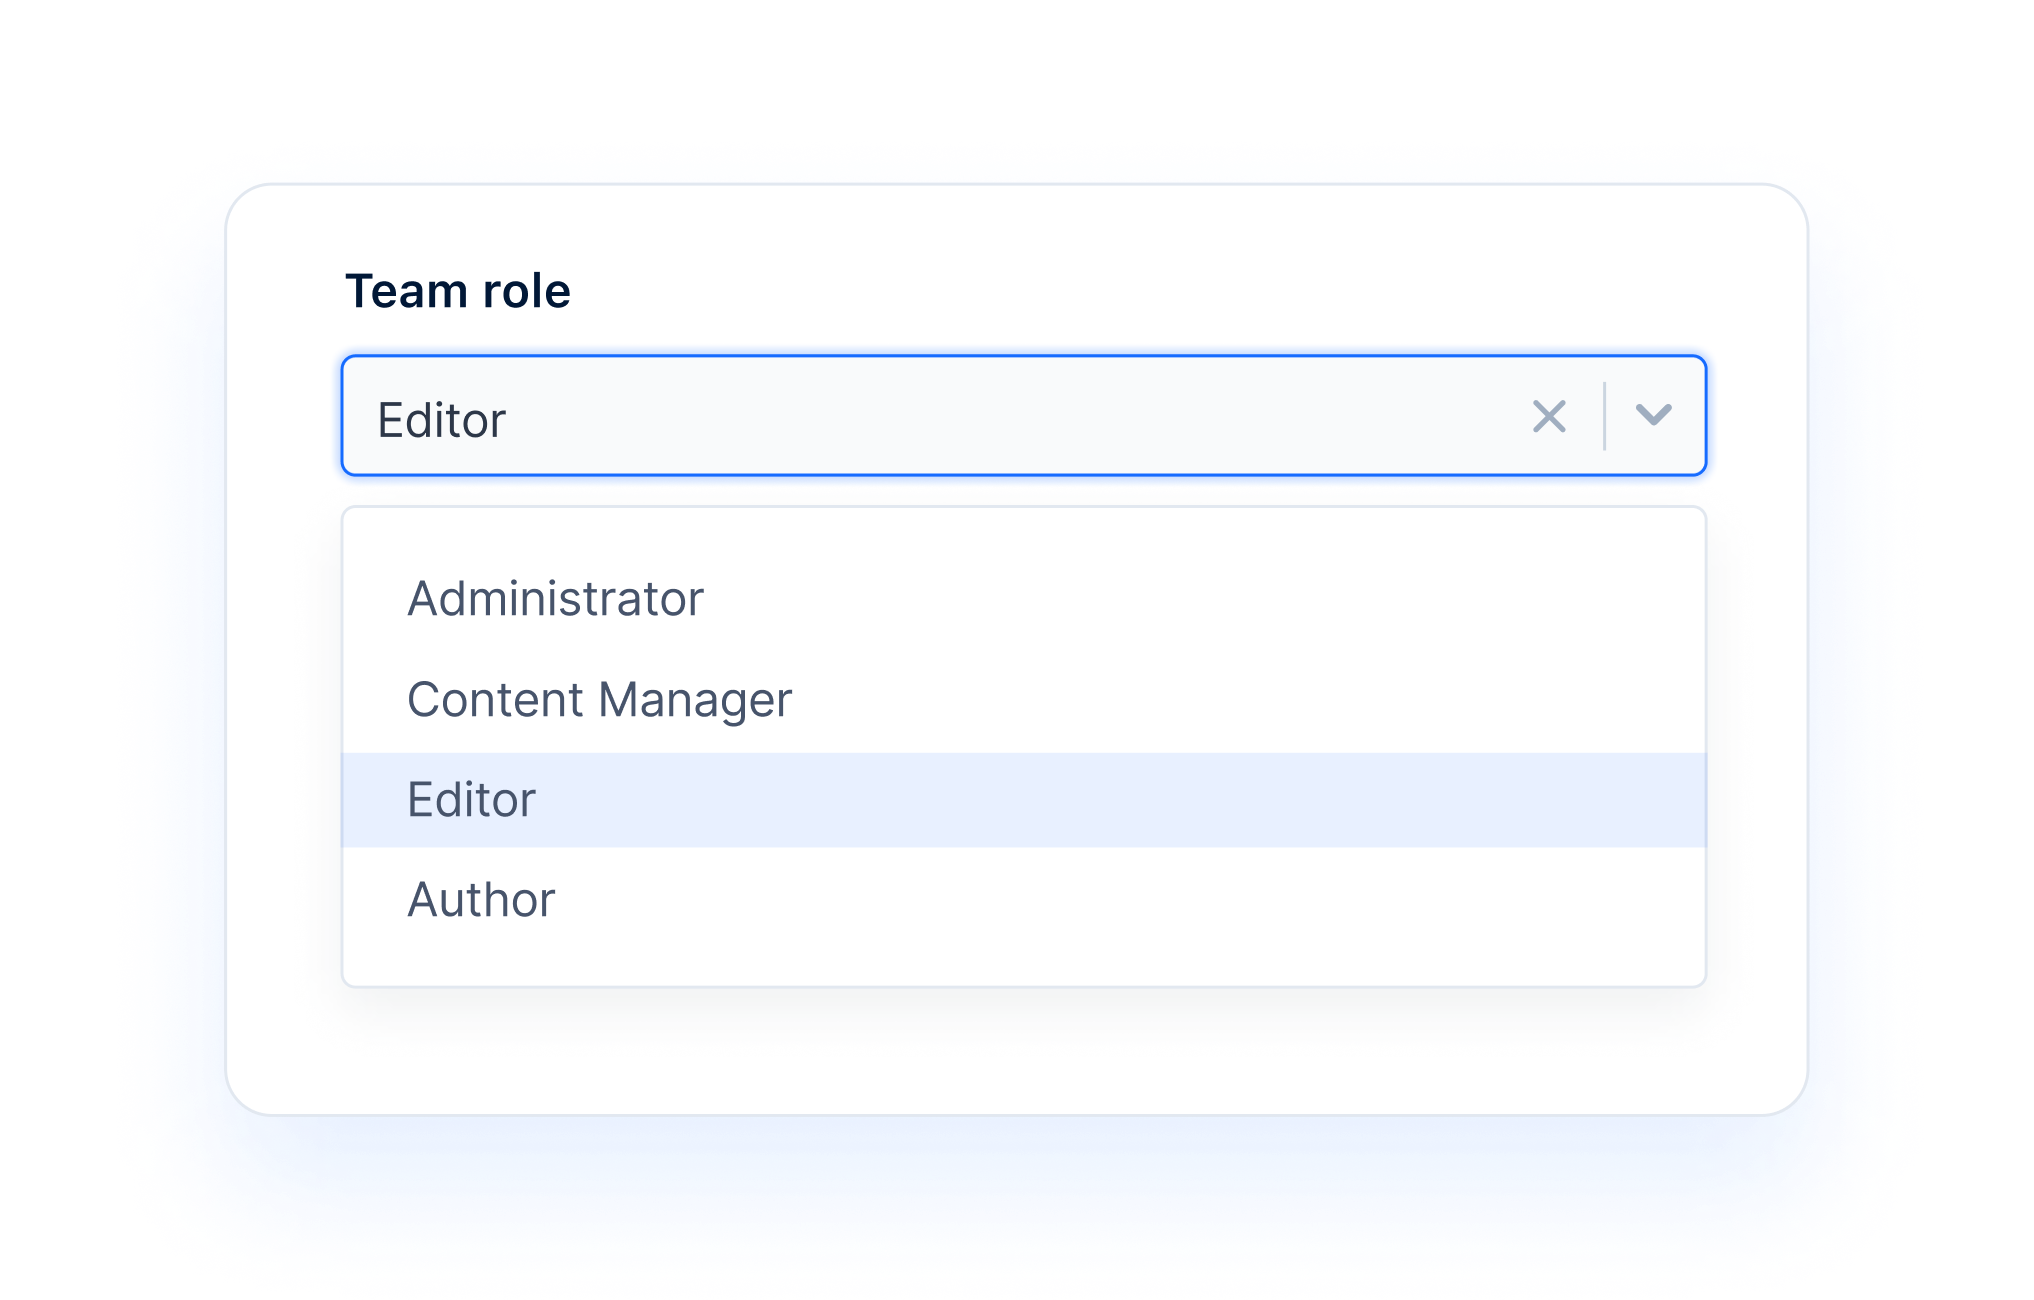 Dropdown selector from Keystone’s Admin UI showing different user roles: Administrator, Editor, Content Manager, Author